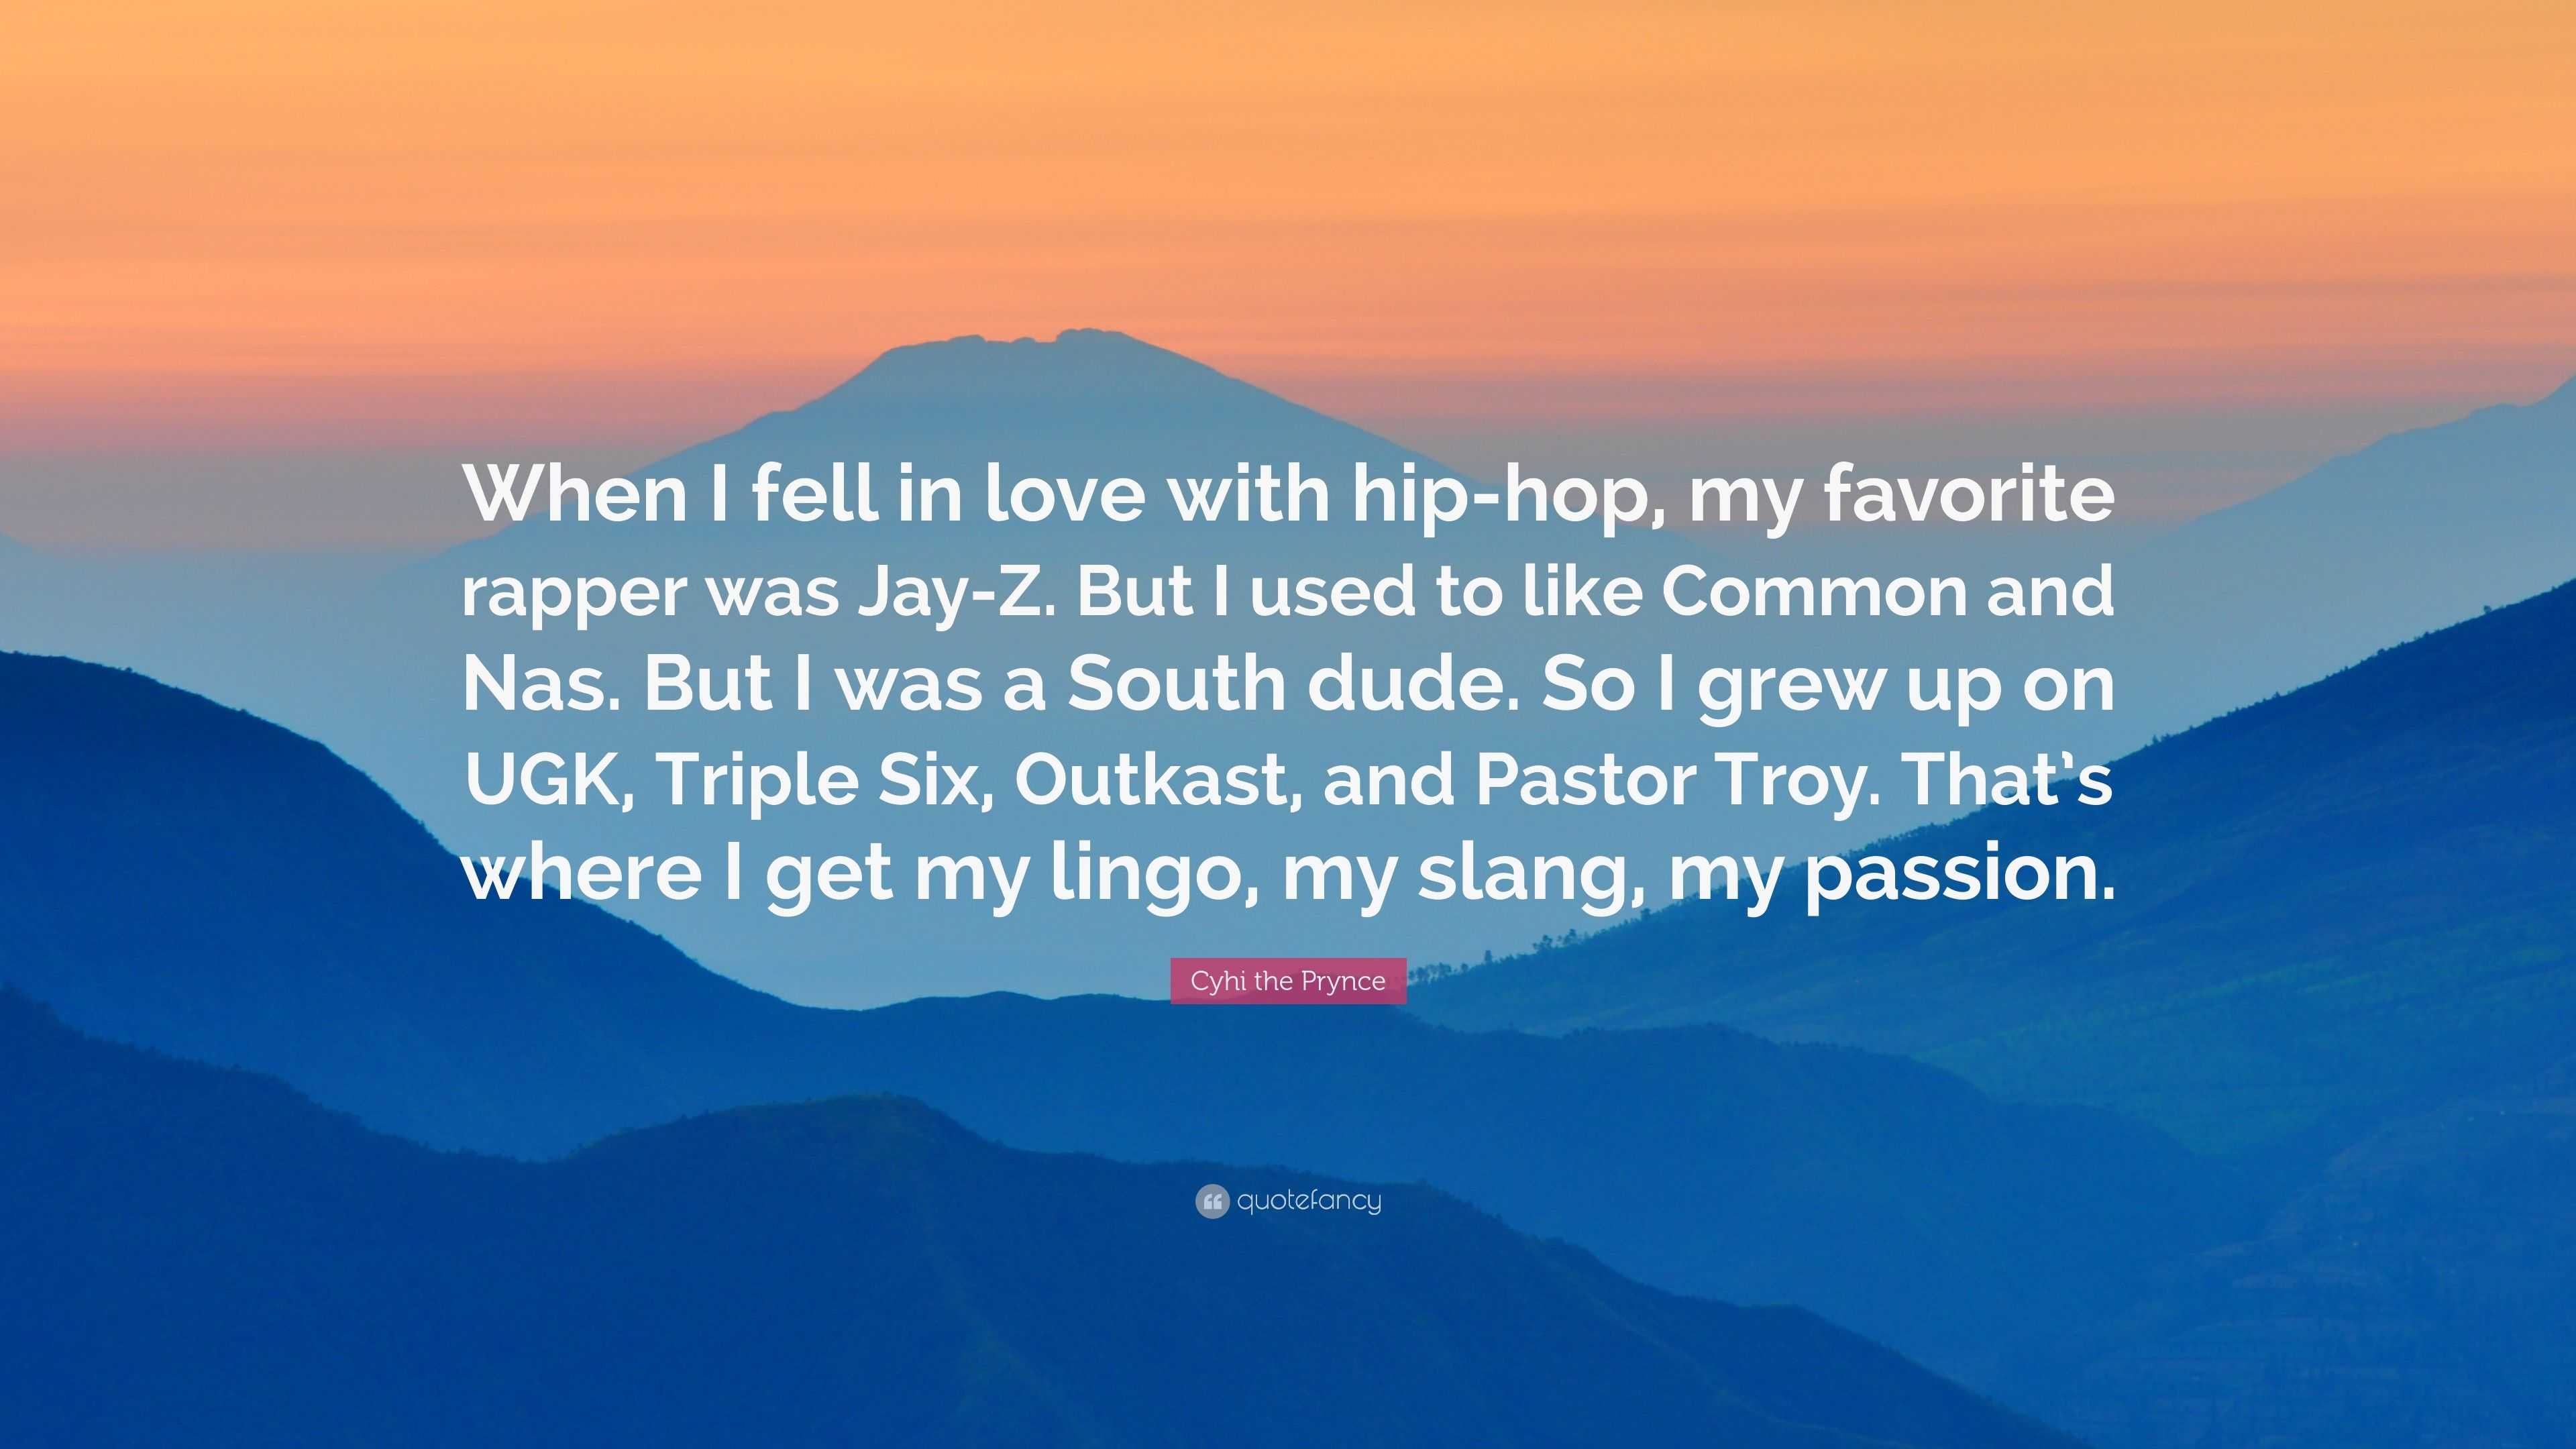 When I Fell in Love With Hip-Hop